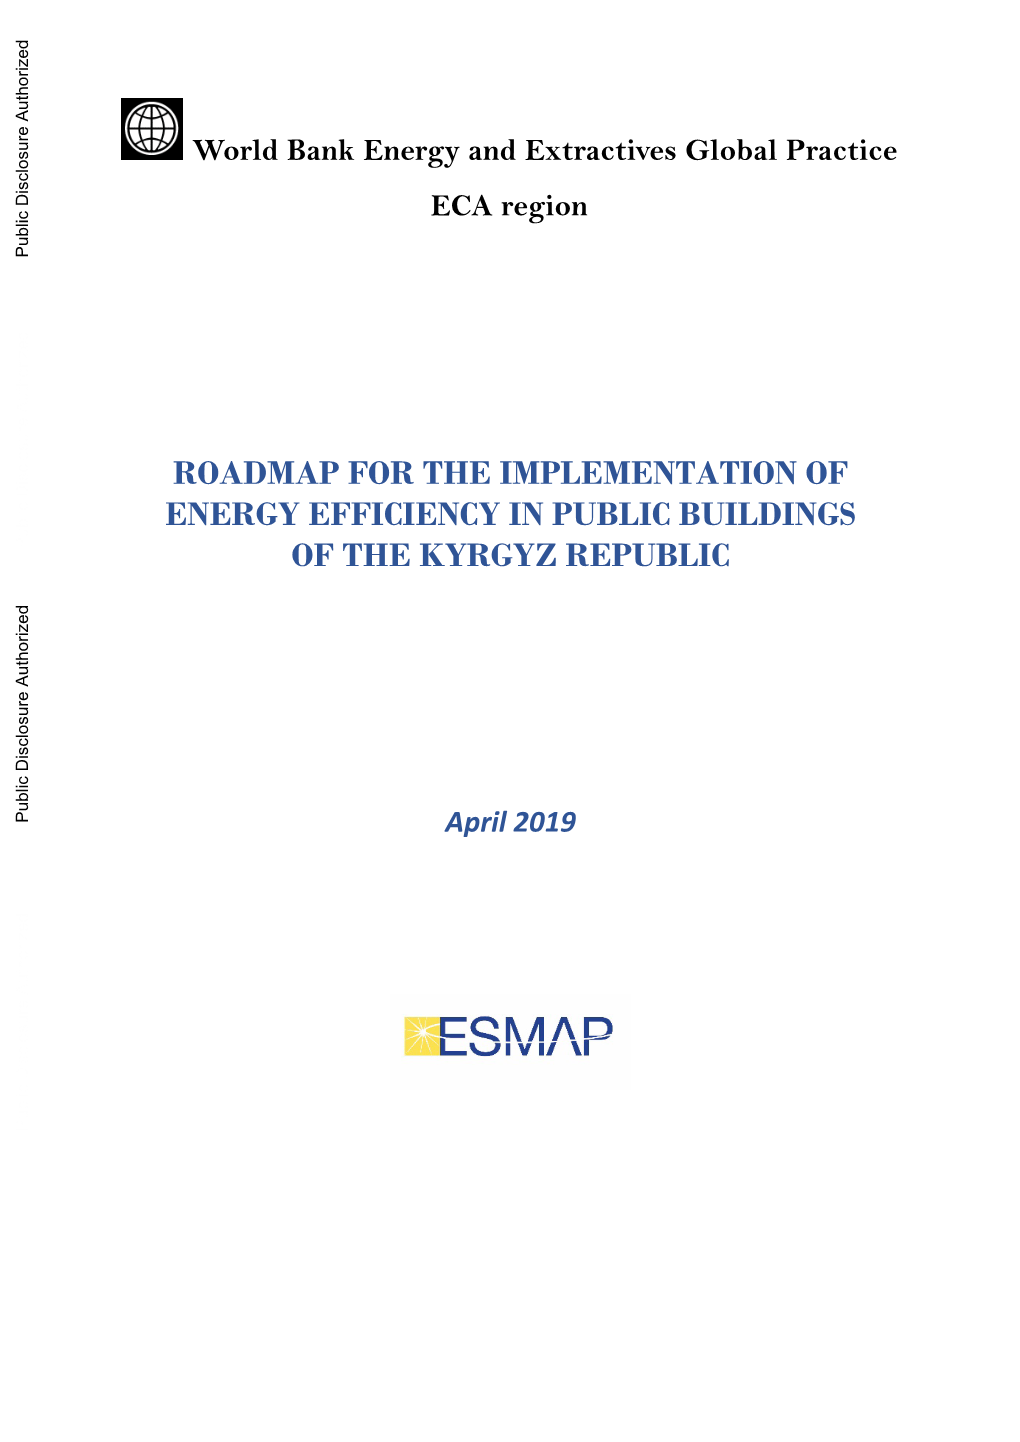 Implementation of Energy Efficiency in Public Buildings of the Kyrgyz Republic I Figures